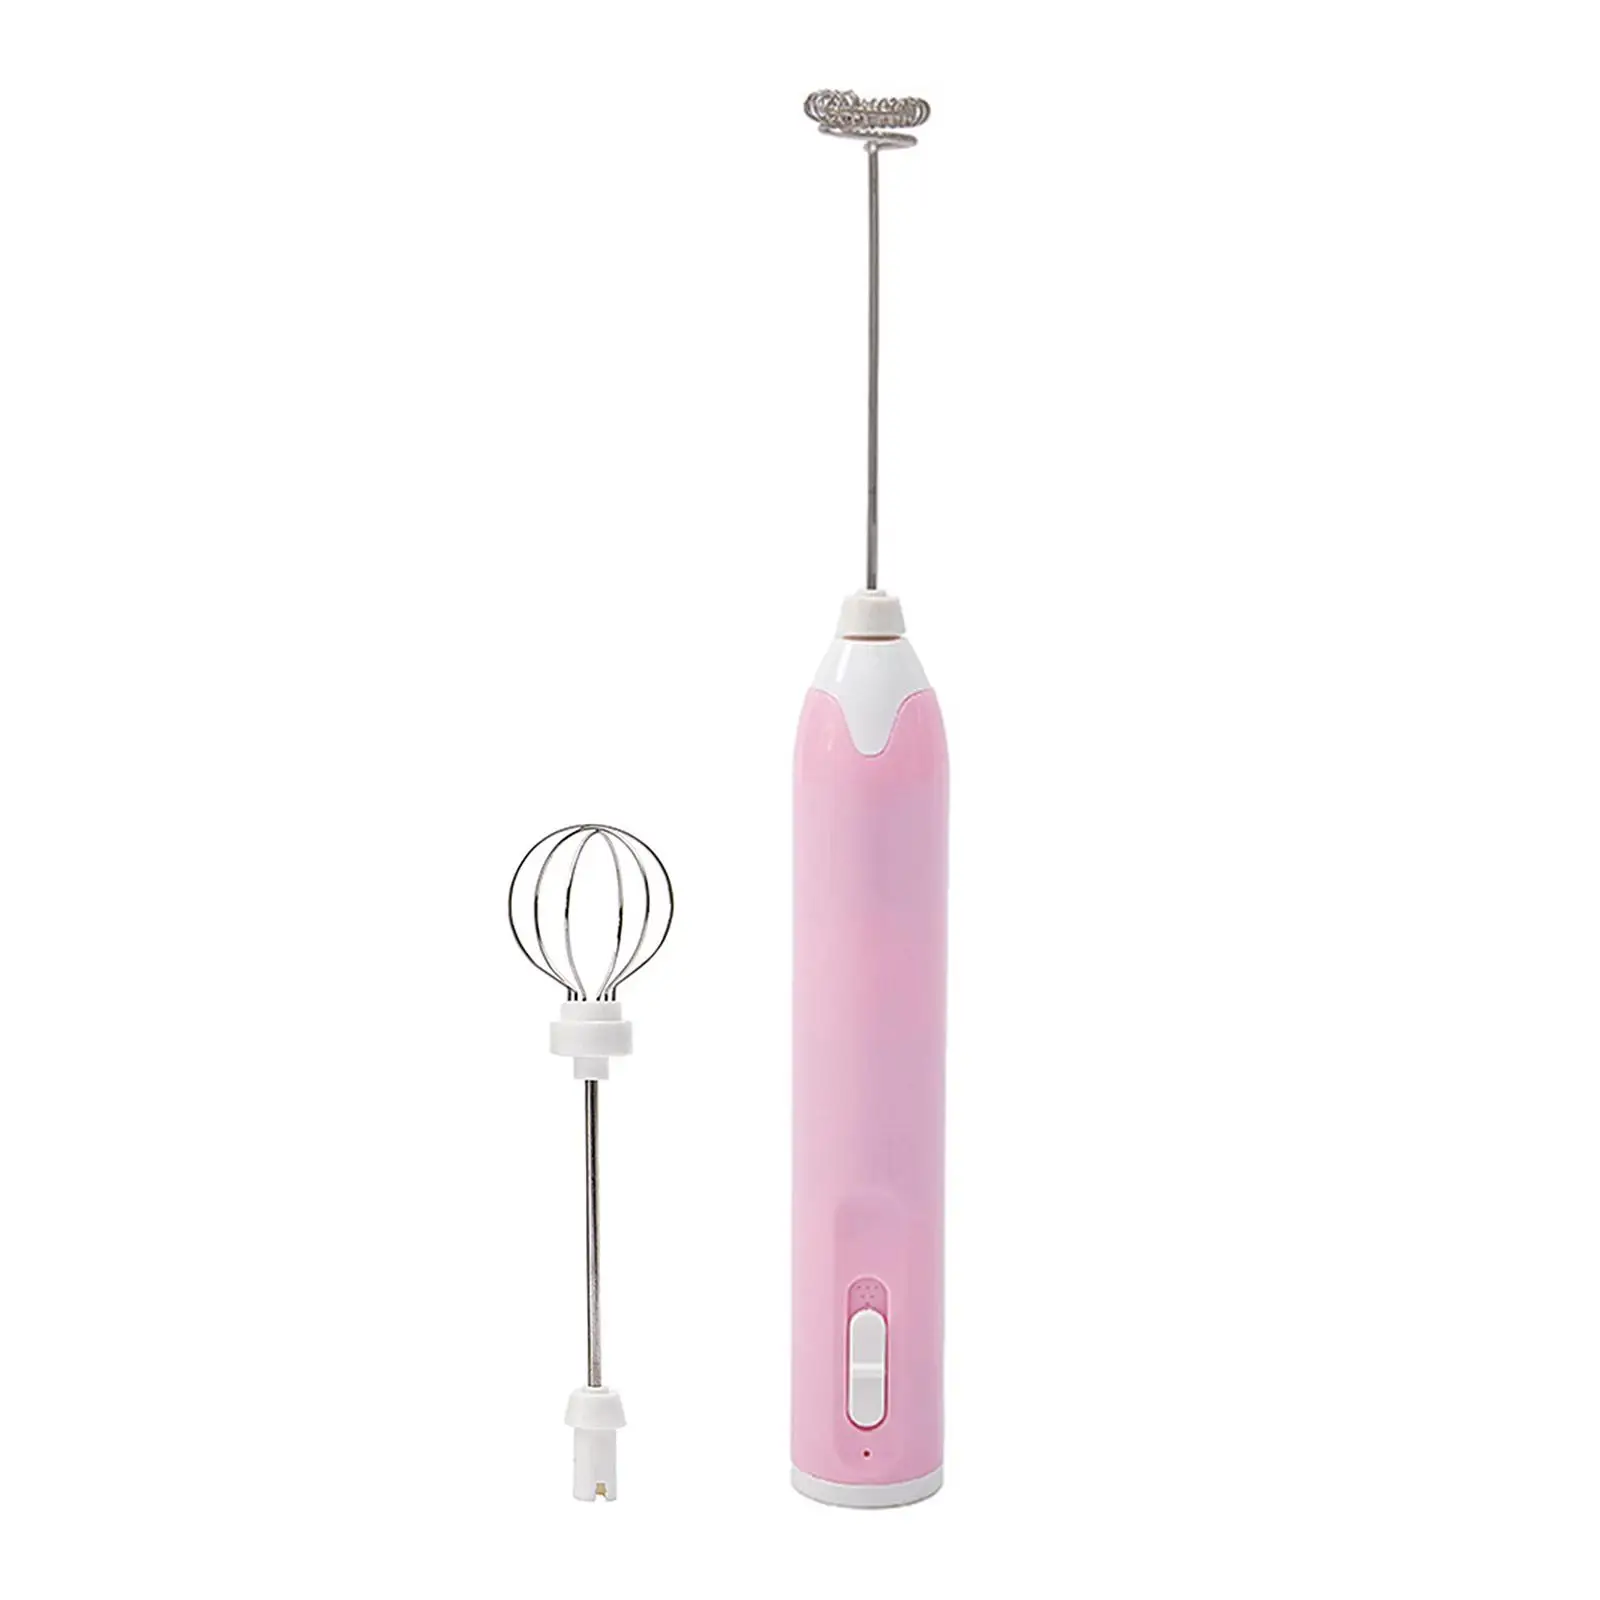 Electric milk Frother Egg Beater Whisk Drink 3 Speeds with 2 Mixing Heads Mixer Blender for Cream Latte Egg